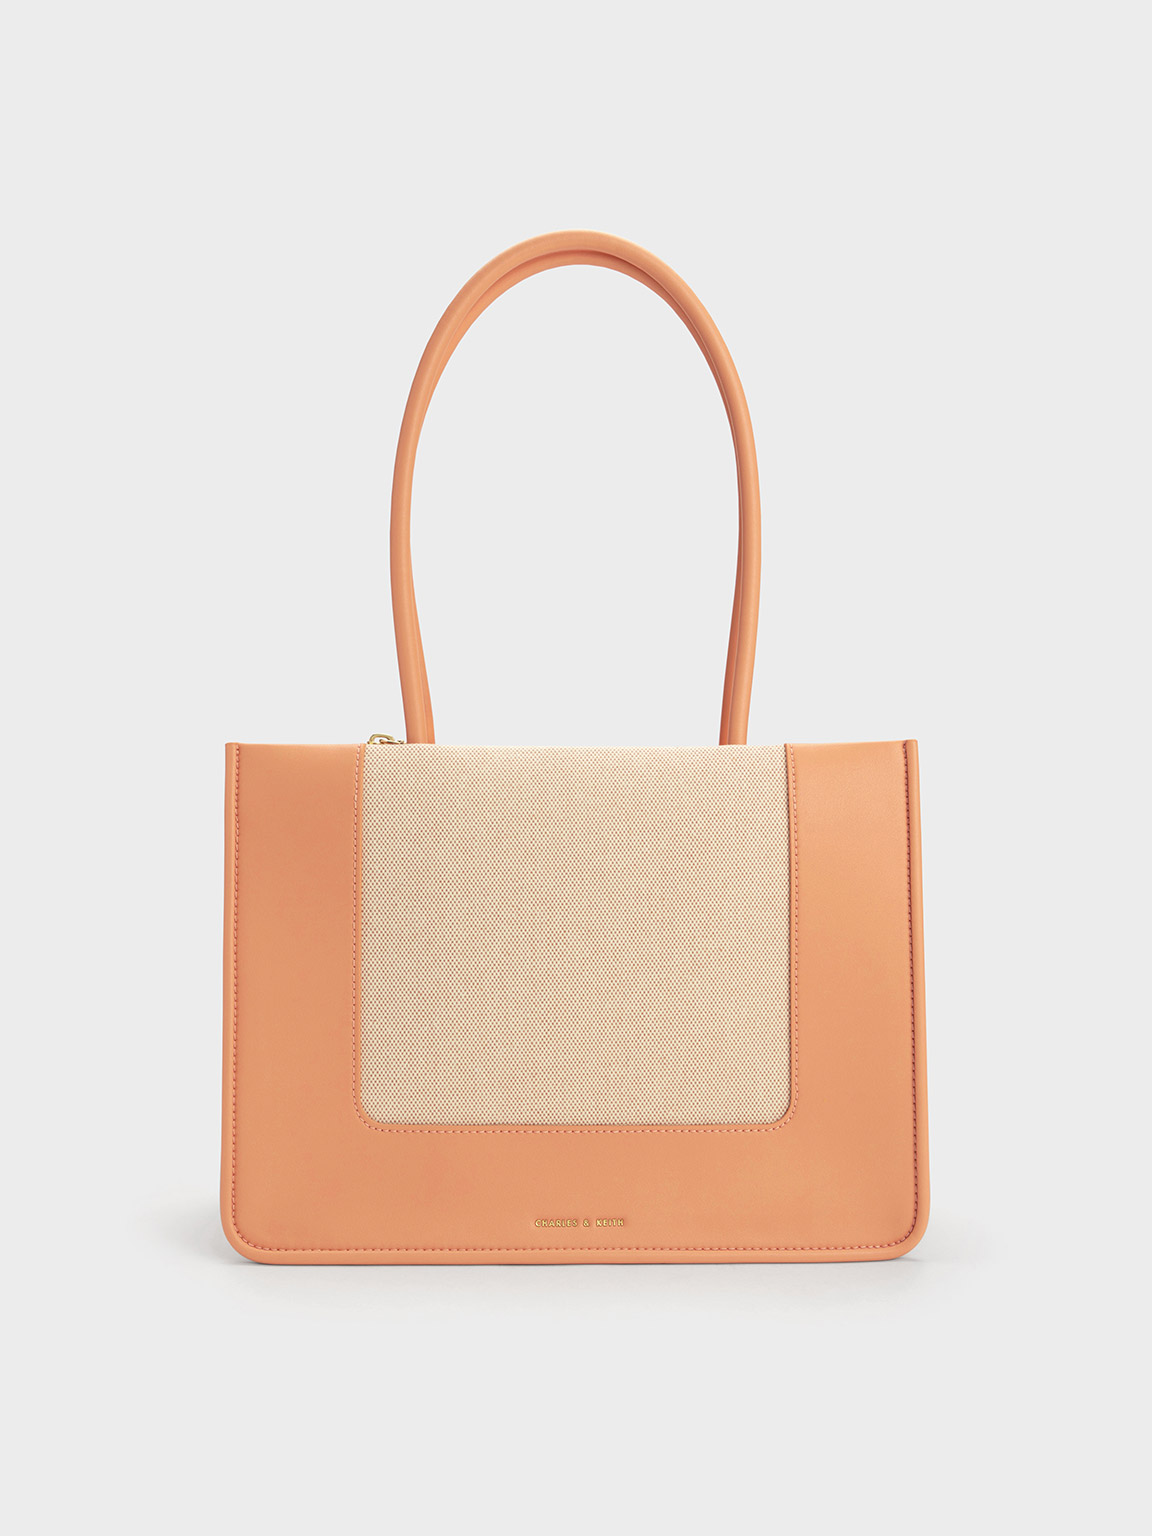 Charles & Keith Daylla Canvas Tote Bag In Orange